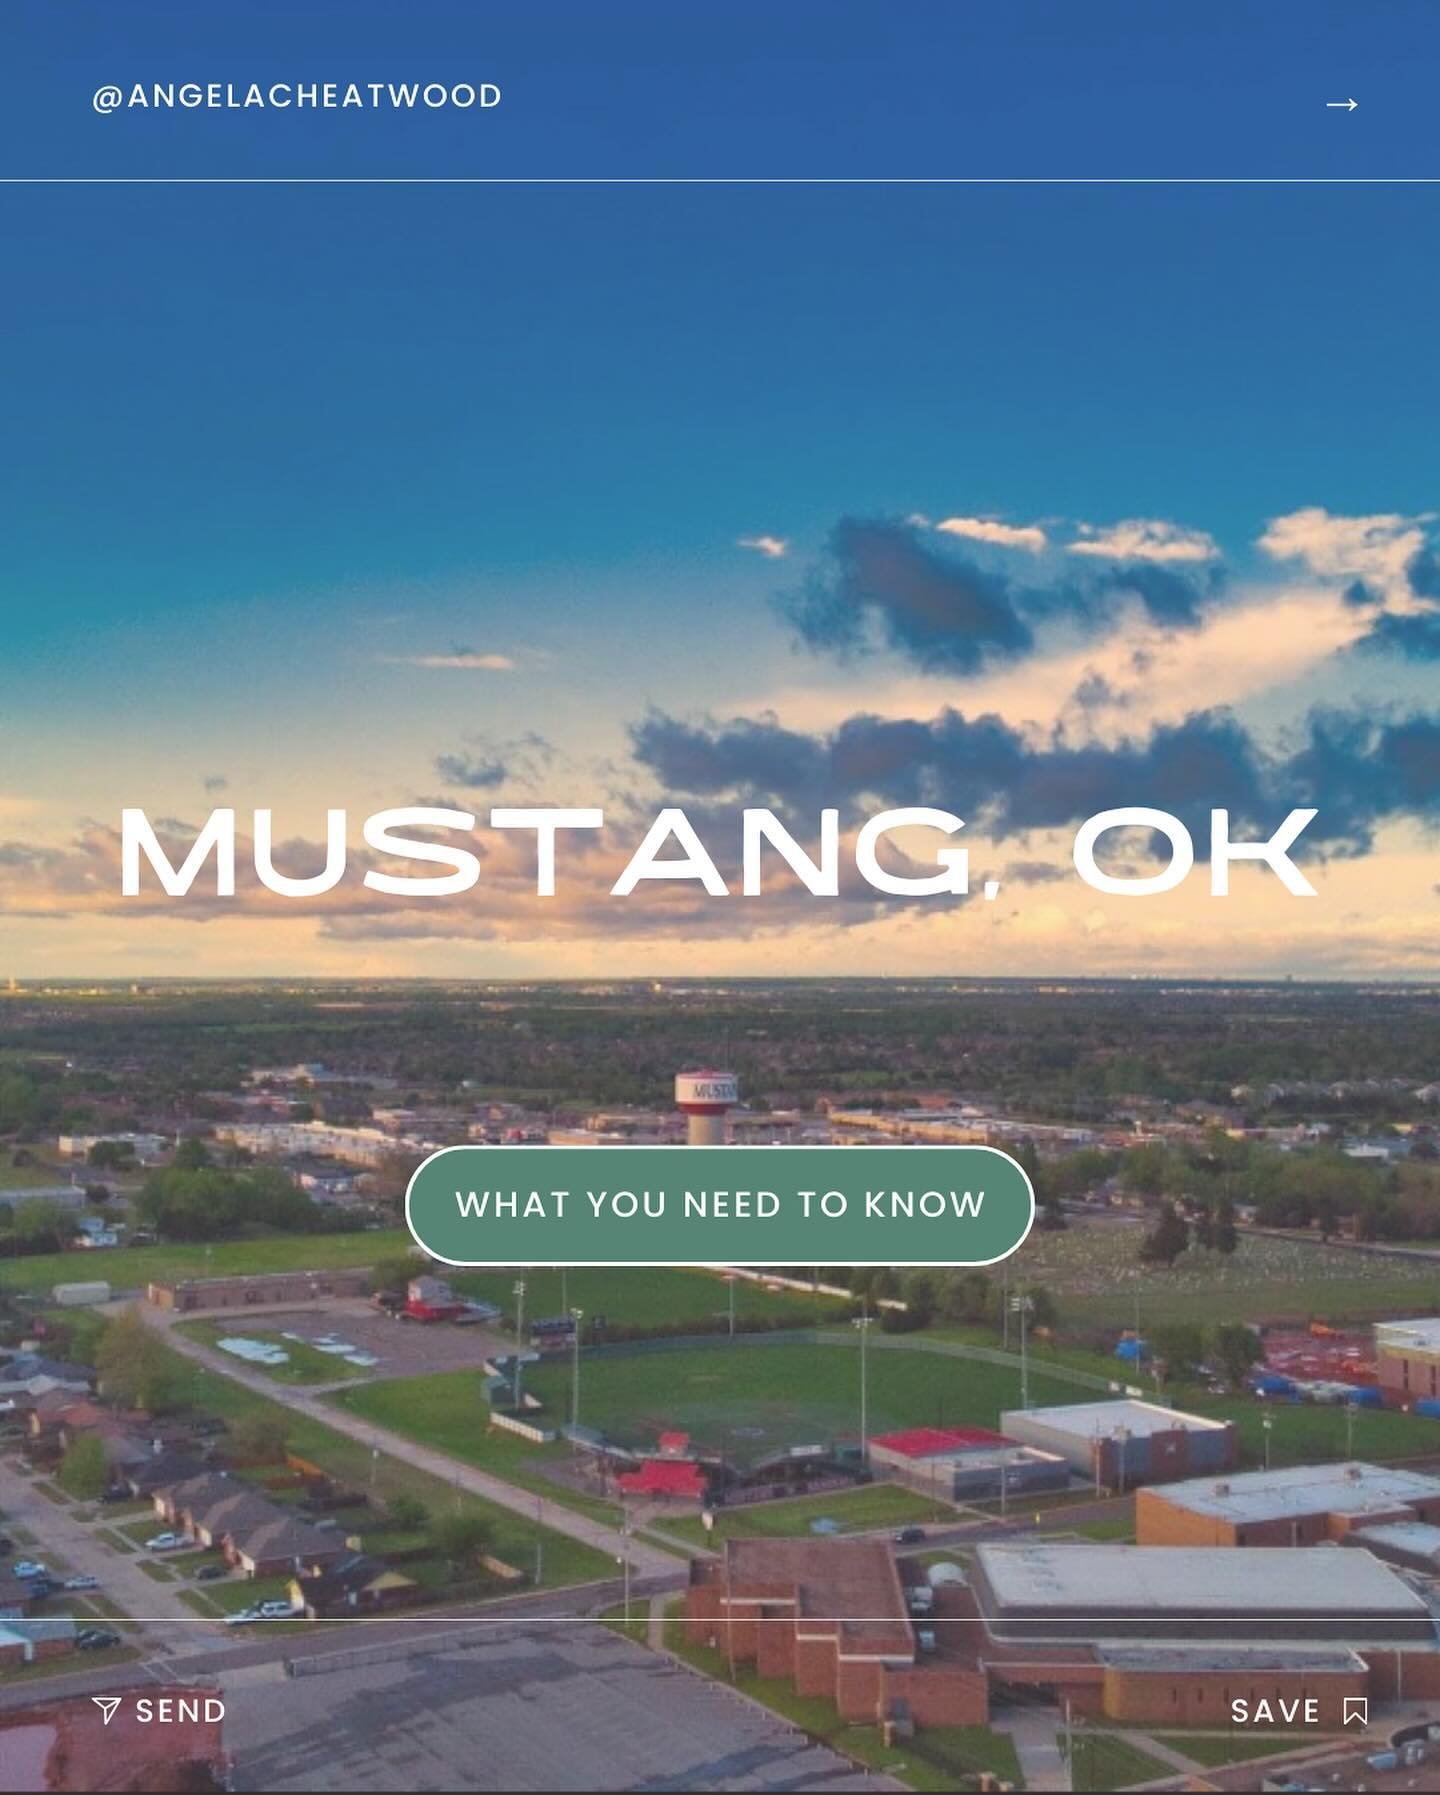 Moving to the Oklahoma City area? You need to know about Mustang, OK! Mustang is quickly growing (new elementary coming soon) and very affordable! 

You'll find neighborhoods with homes on an acre as well as many new construction options. Swipe for a